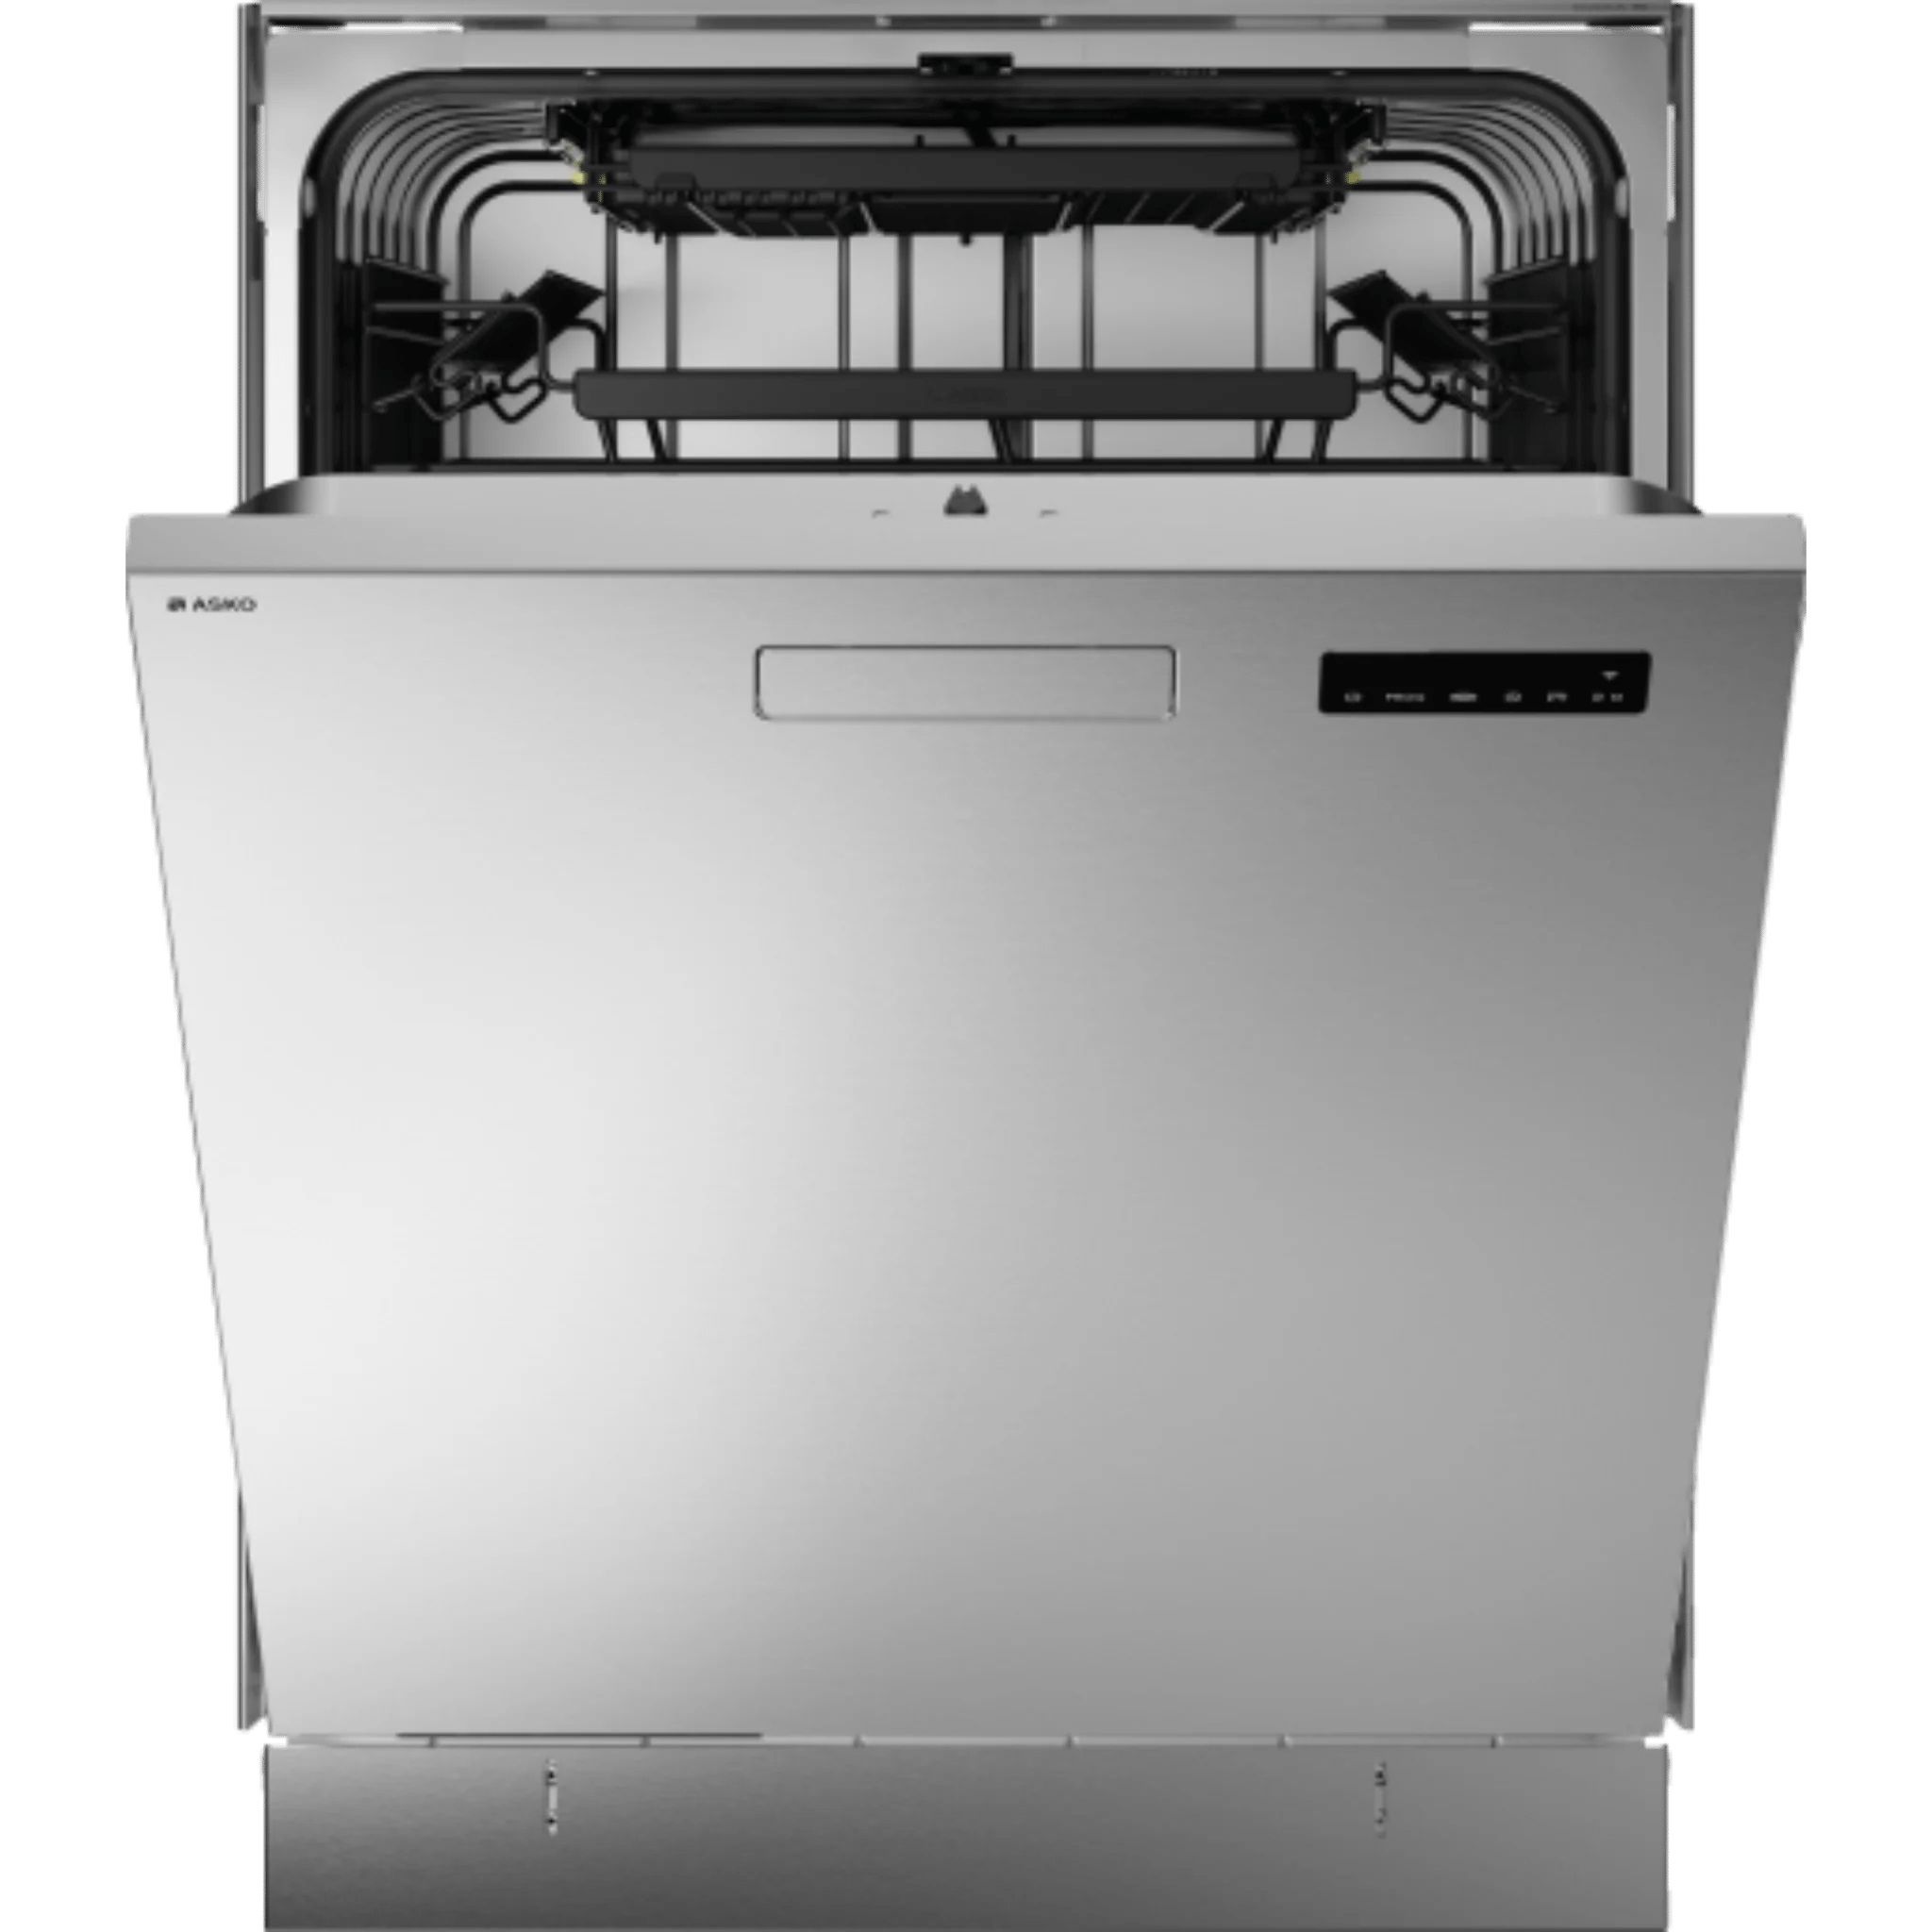 Asko Classic 24 Inch Wide 16 Place Setting Built-In Front Control Dishwasher with Pocket Handle, Turbo Combi Drying™, and Auto Door Open Drying™ Asko Classic DBI364IS Luxury Appliances Direct